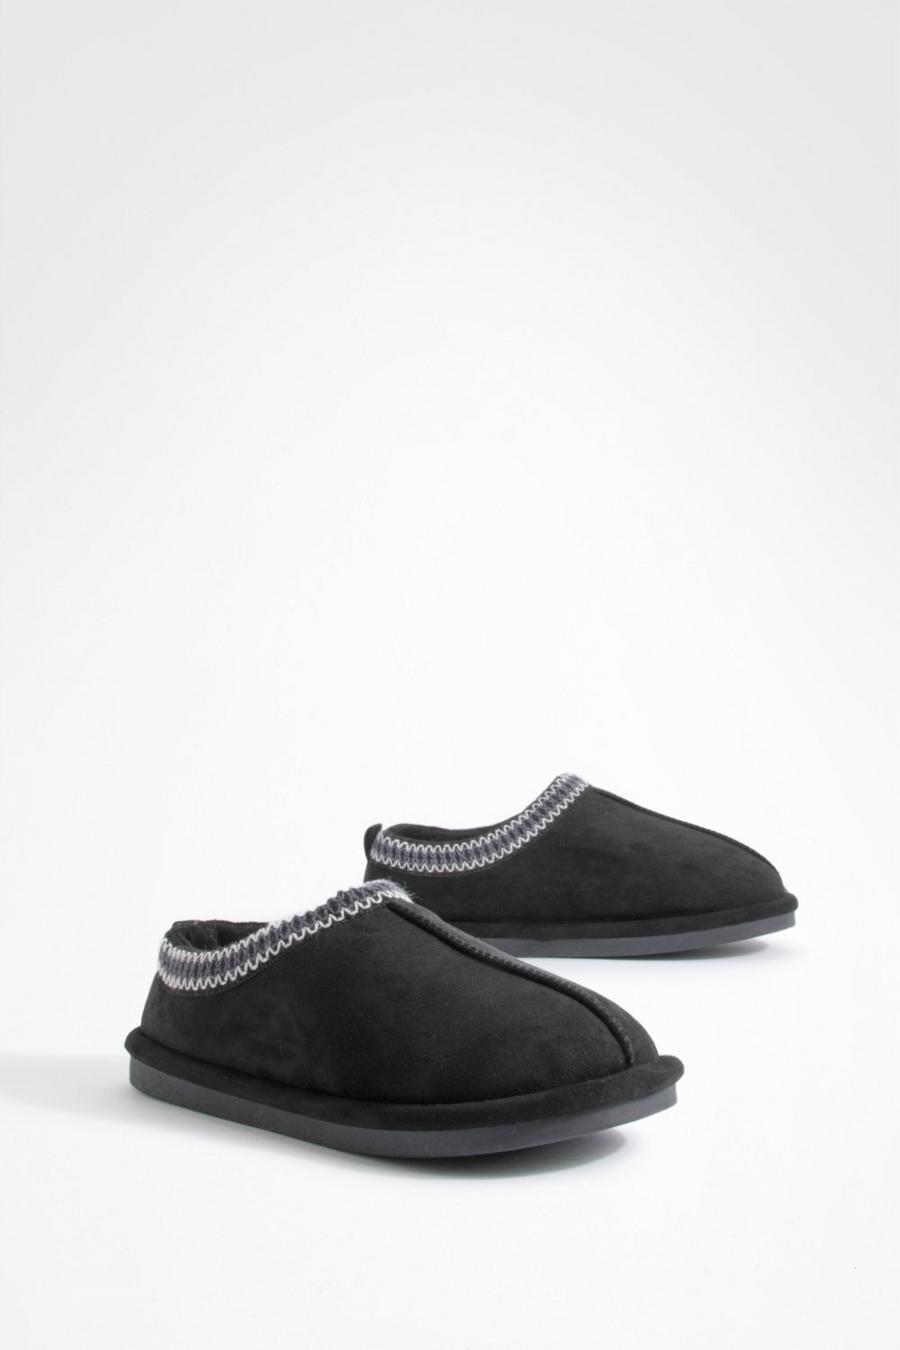 Black Embroidered Cozy Slip On Mules